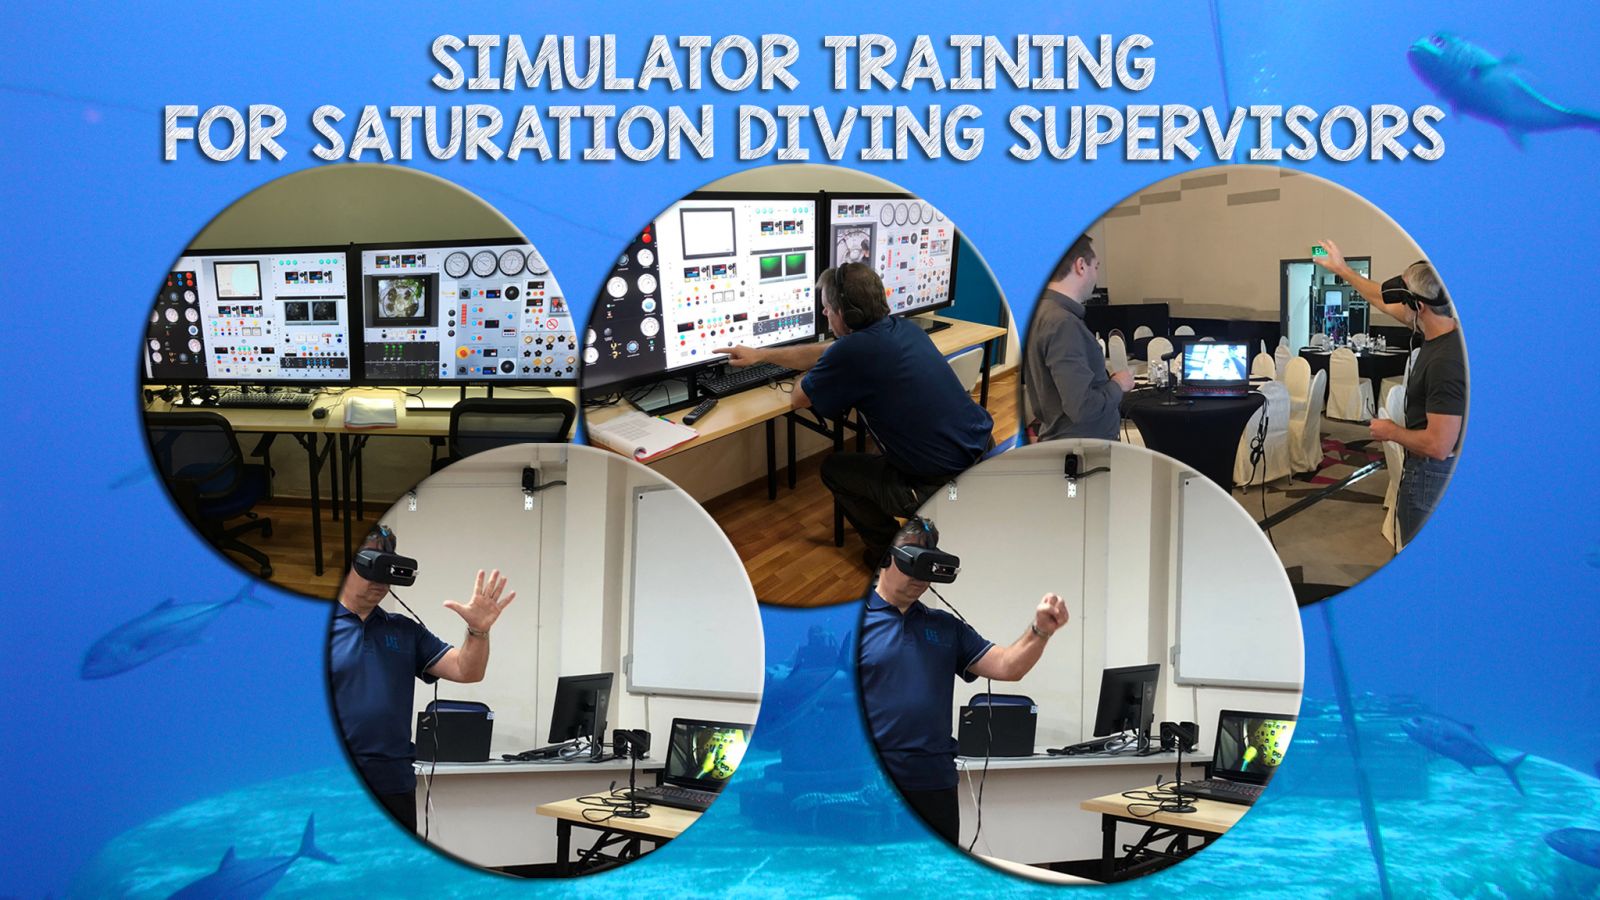 New Launch: Simulator Training for Saturation Diving Supervisors